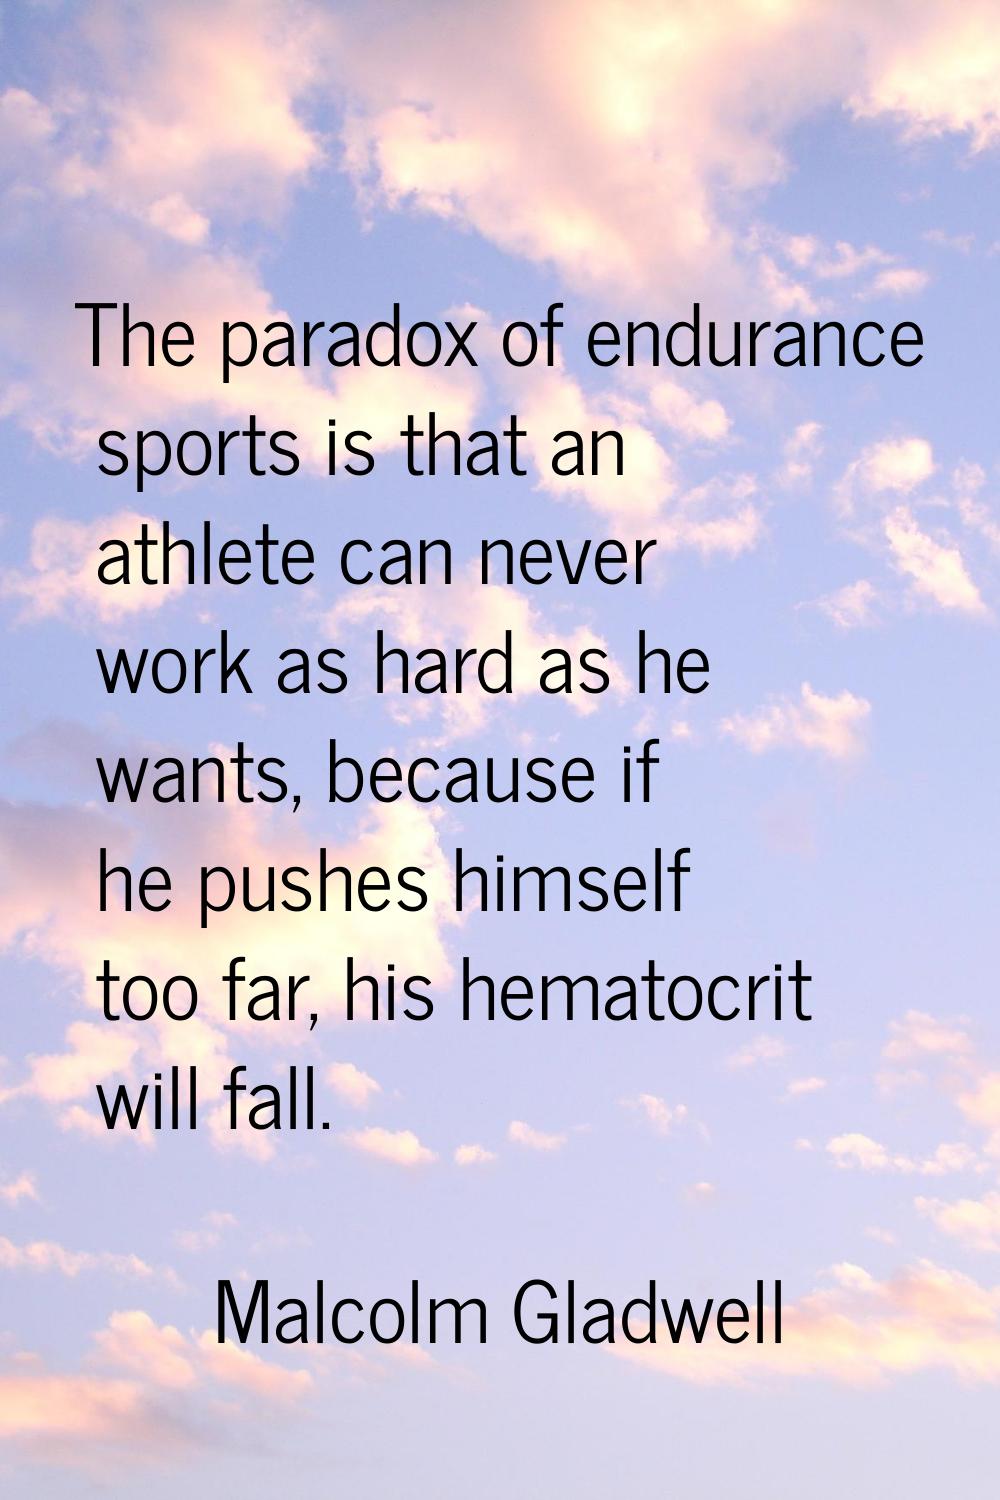 The paradox of endurance sports is that an athlete can never work as hard as he wants, because if h